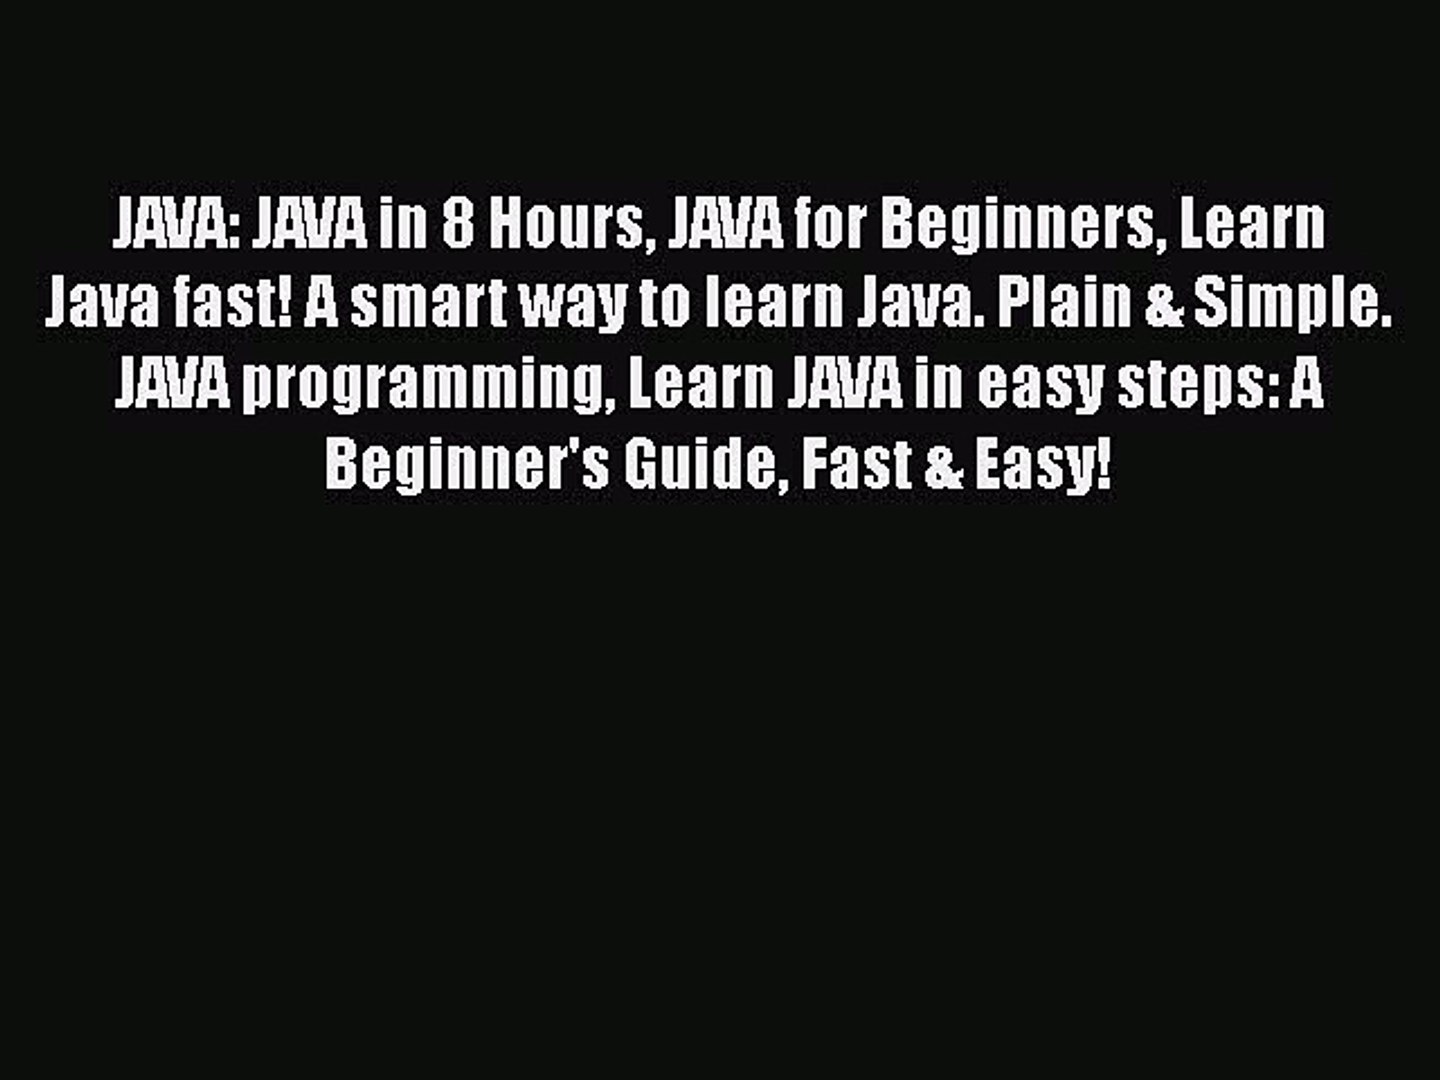 Read JAVA: JAVA in 8 Hours JAVA for Beginners Learn Java fast! A smart way to learn Java. Plain